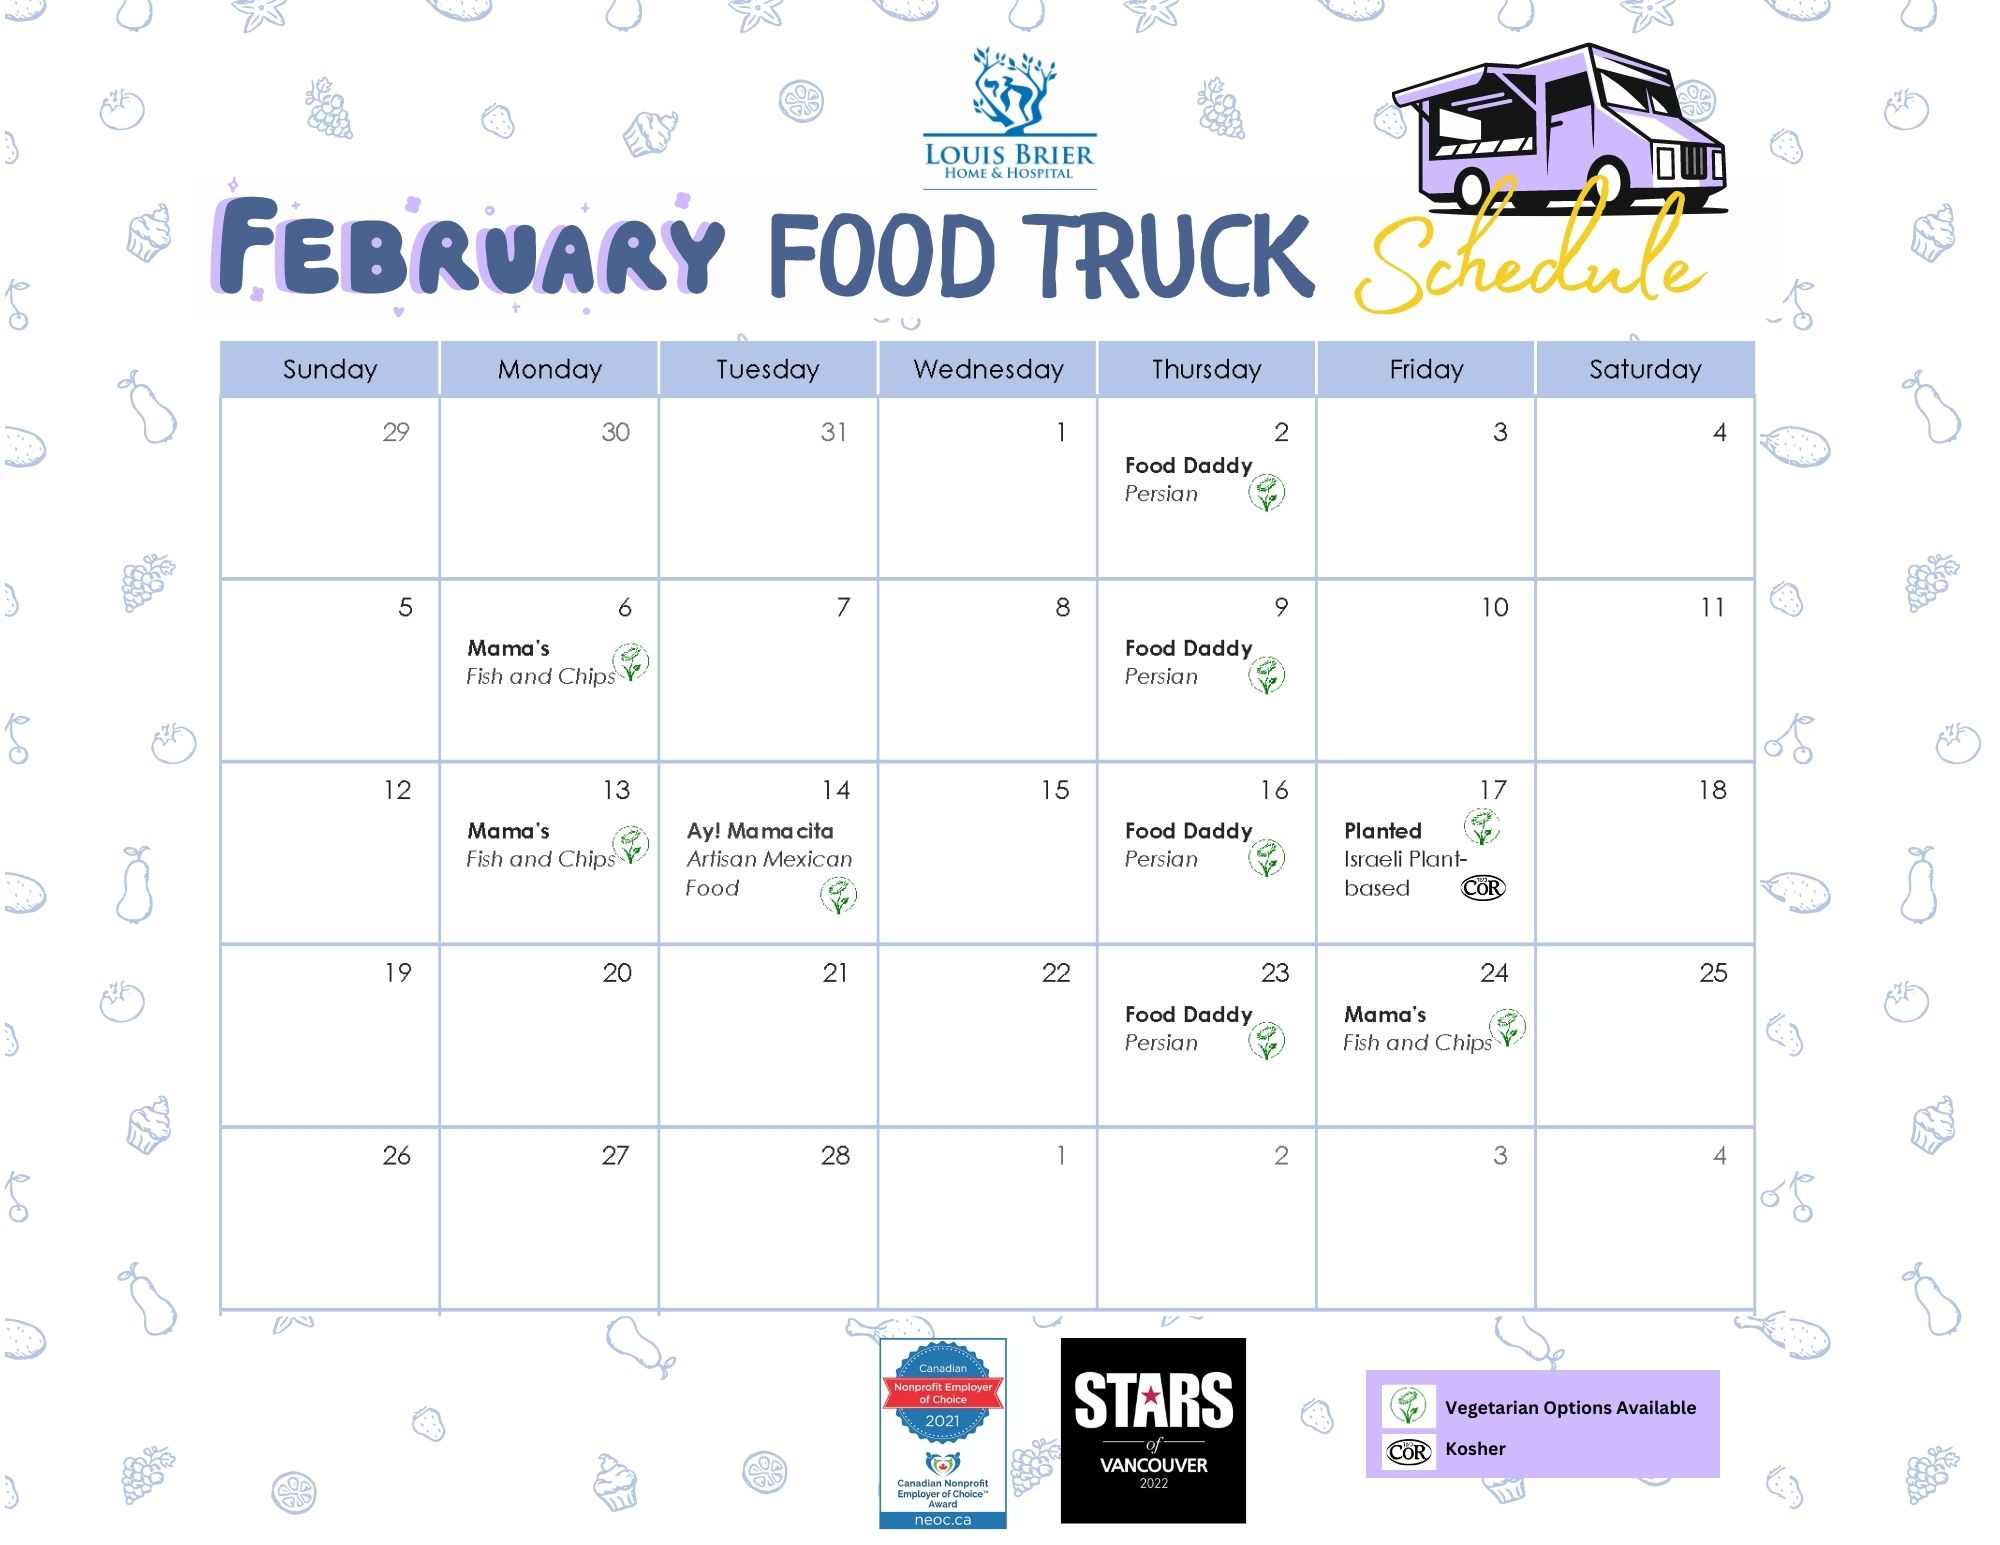 Food Truck Schedule Louis Brier Home and Hospital